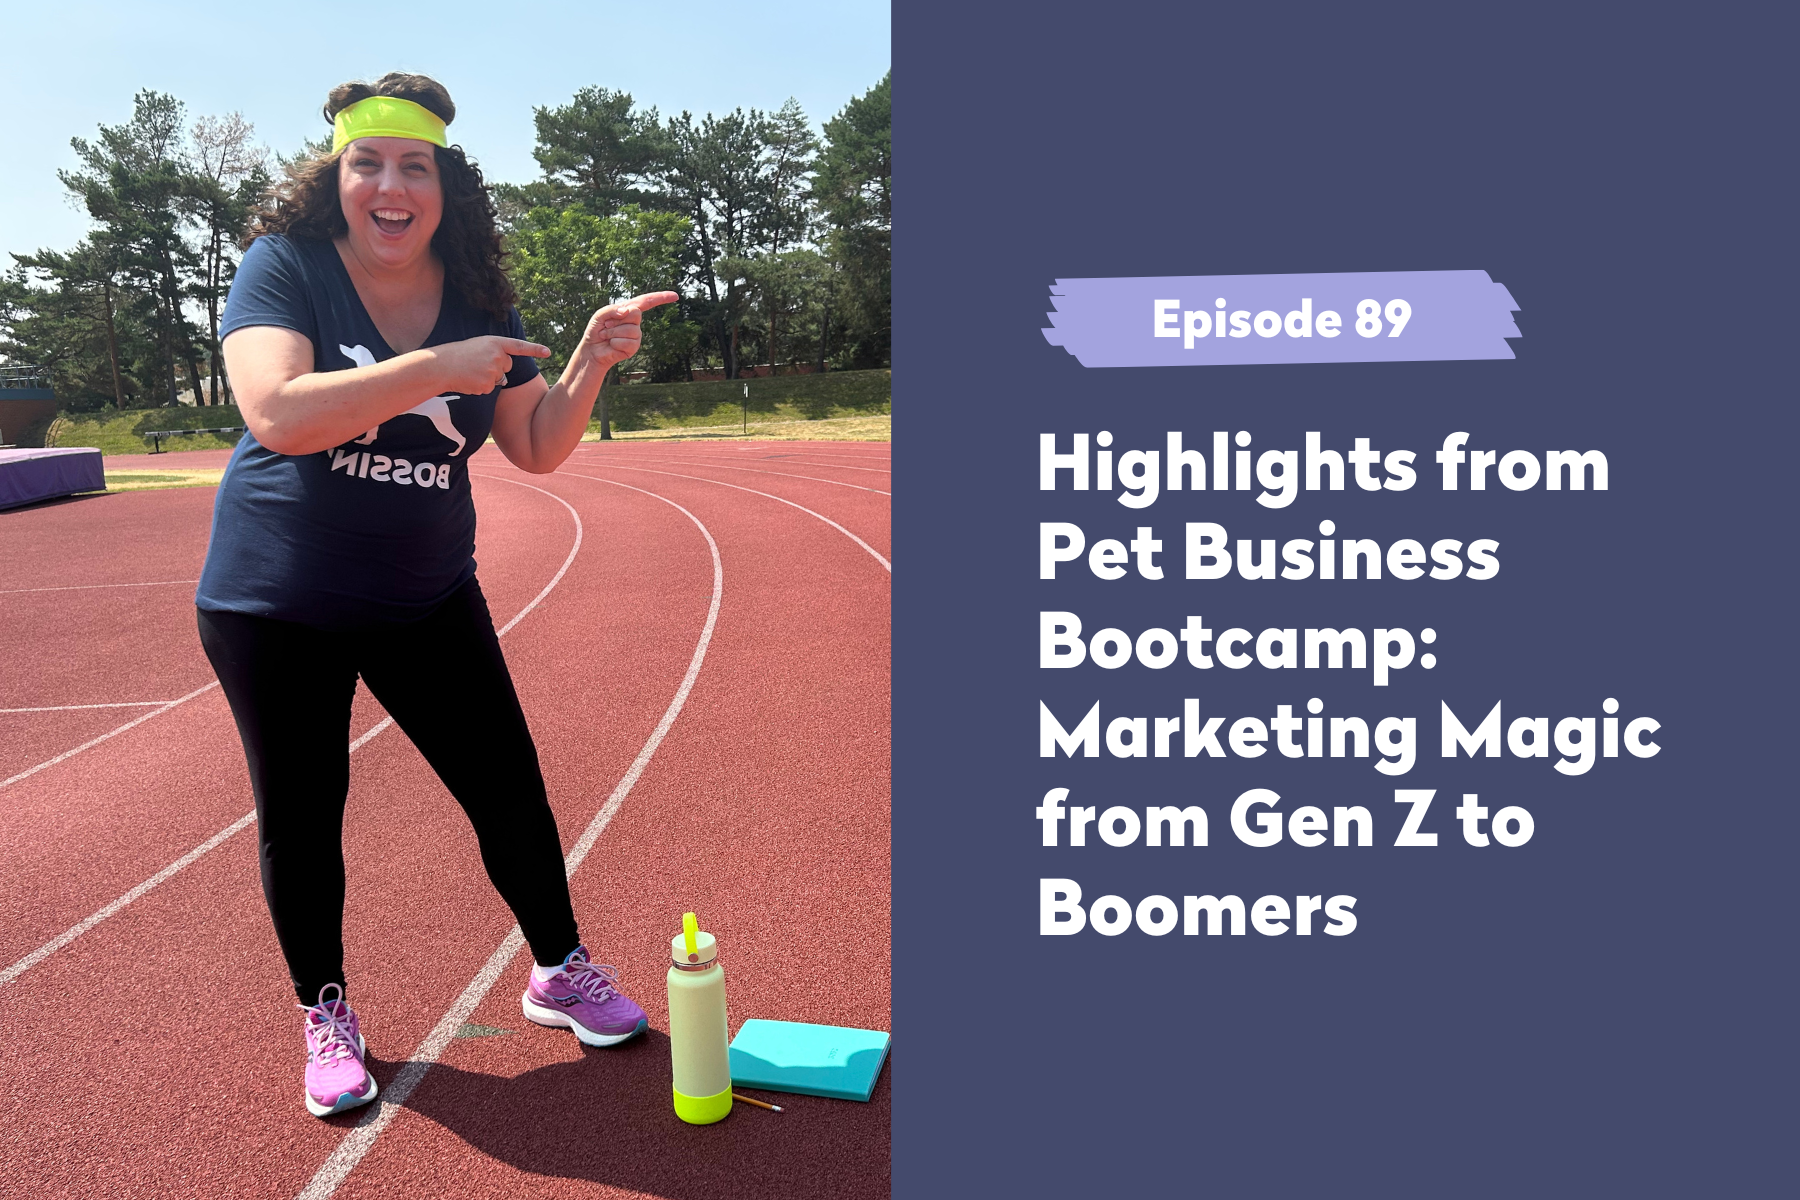 Episode 89 | Highlights from Pet Business Bootcamp: Marketing Magic from Gen Z to Boomers